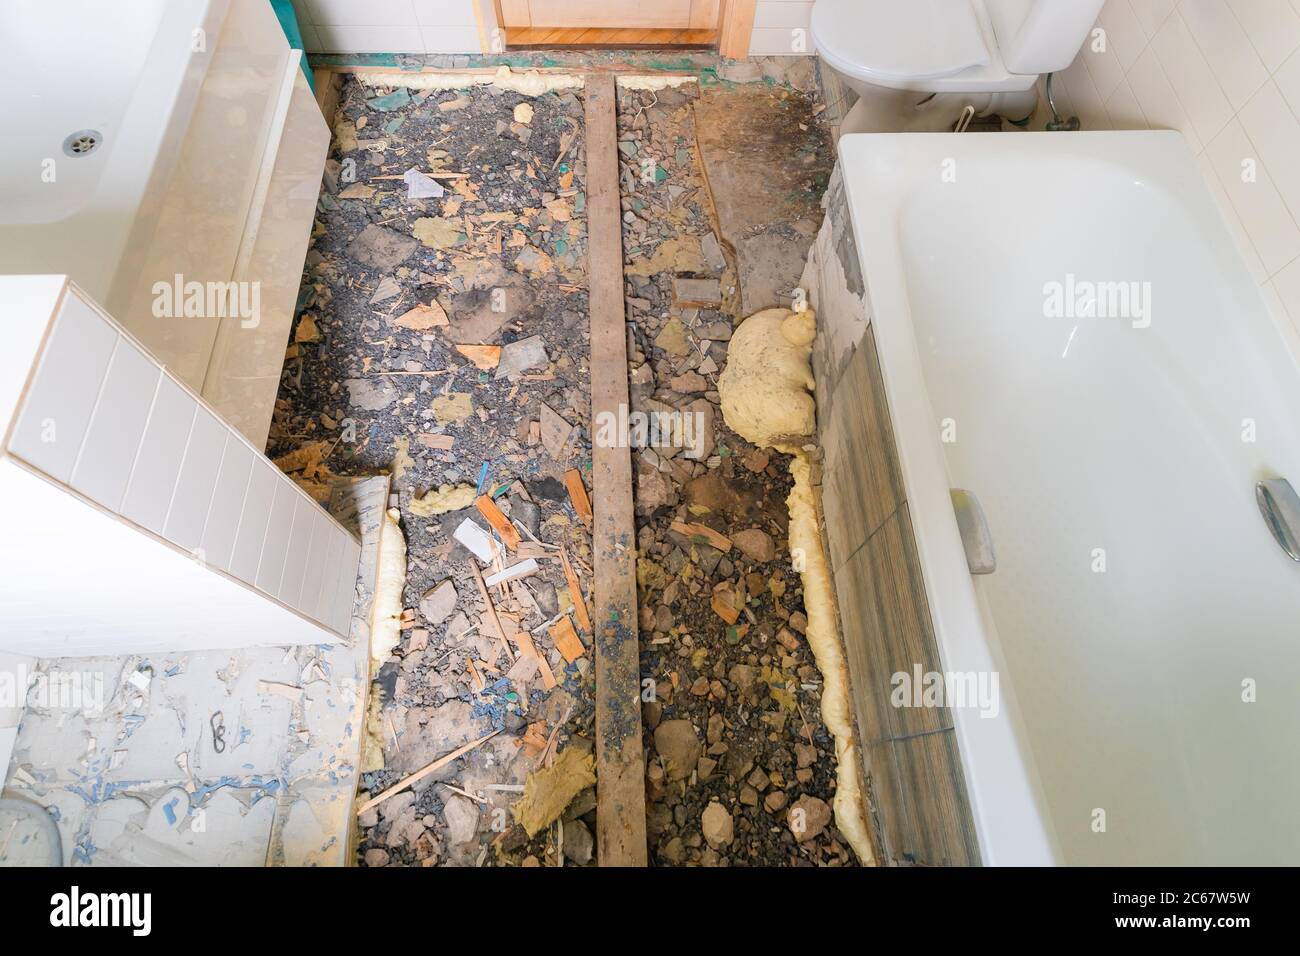 Reconstruction Of Bathroom High Resolution Stock Photography And Images Alamy